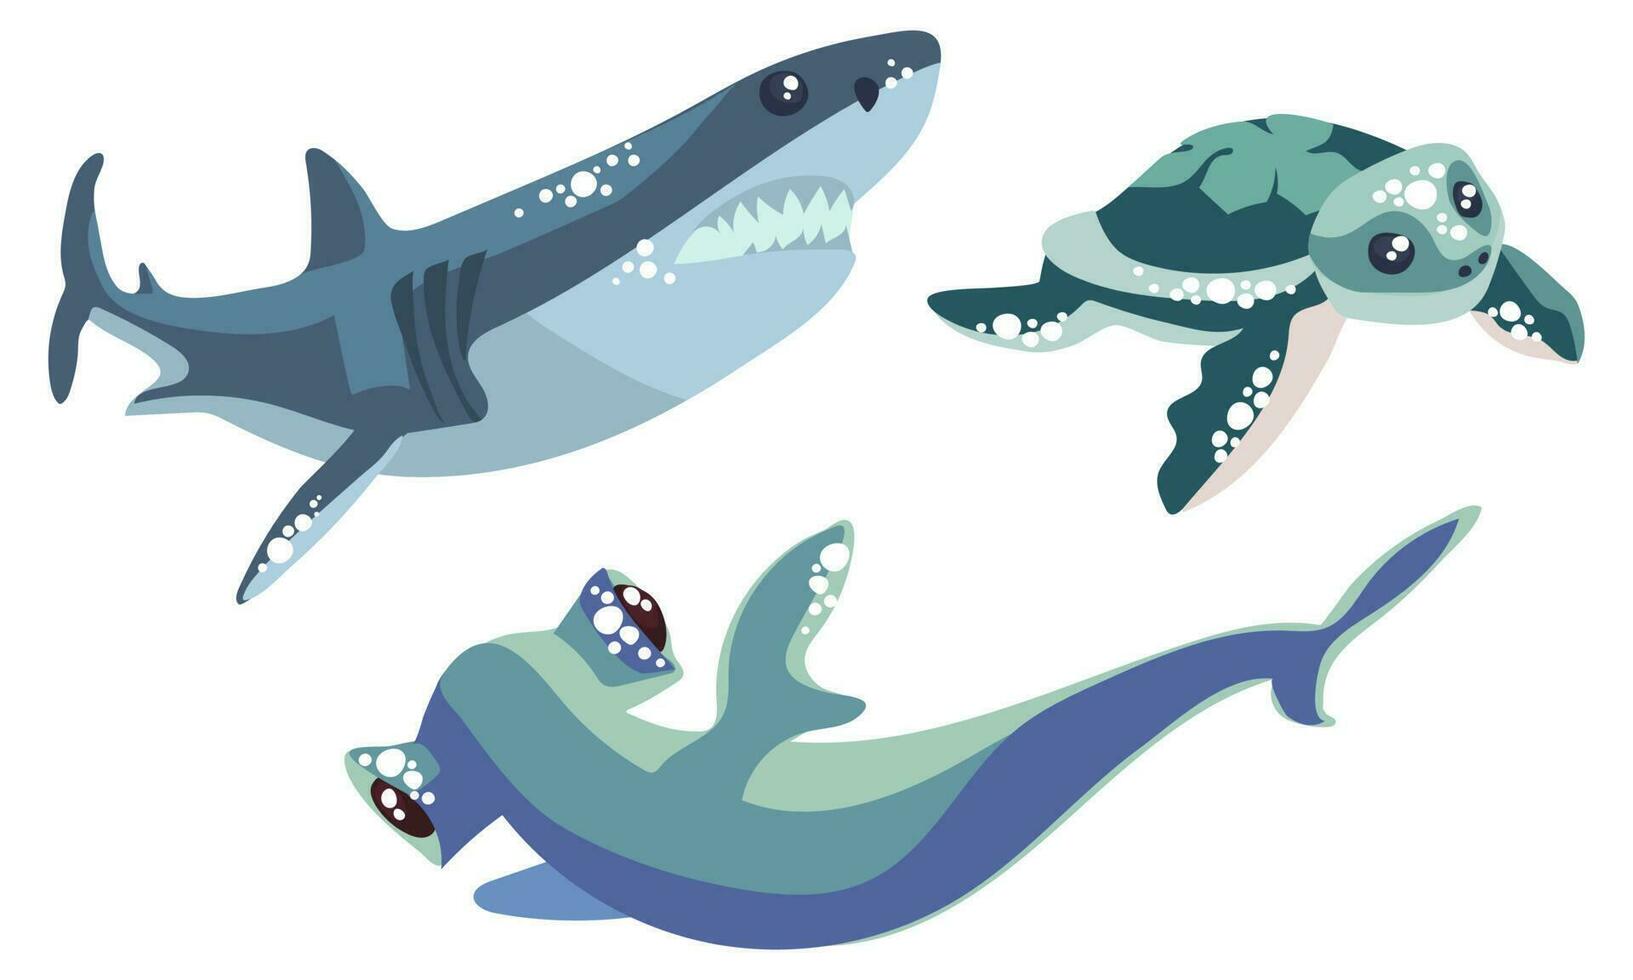 A mini set with a hammerhead shark and a regular shark and turtle. Cute animals in blue shades are swimming isolated on a white background. Collection of stickers on the theme of marine animals vector